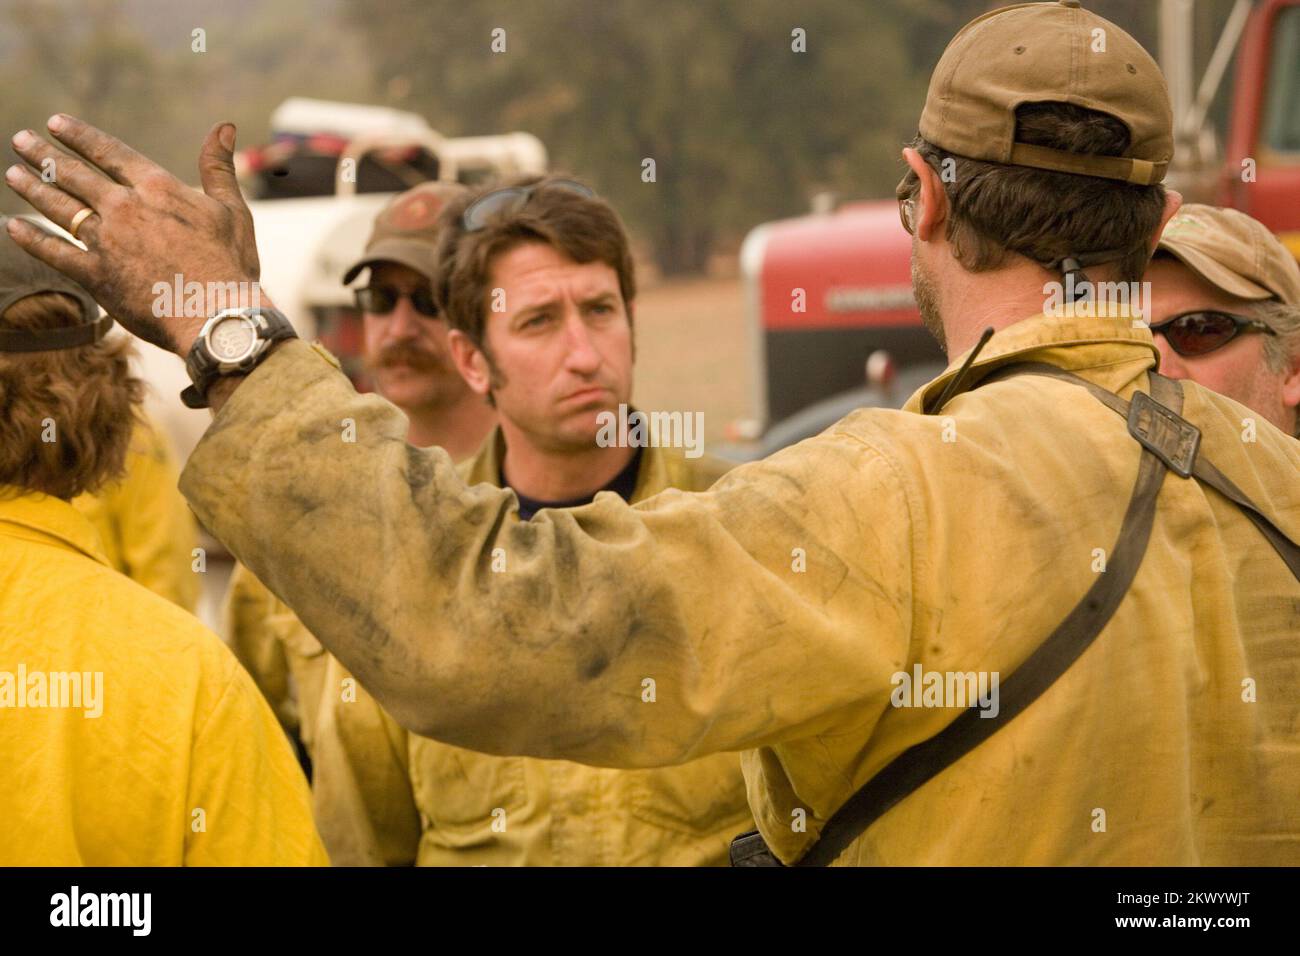 Wildfires,  San Diego, CA, October 27, 2007   Firefighters discuss fire behavior on the Harris fire, near the Mexican border. Currently the fires in Southern California have burned nearly 350,000 acres. Andrea Booher/FEMA.. Photographs Relating to Disasters and Emergency Management Programs, Activities, and Officials Stock Photo